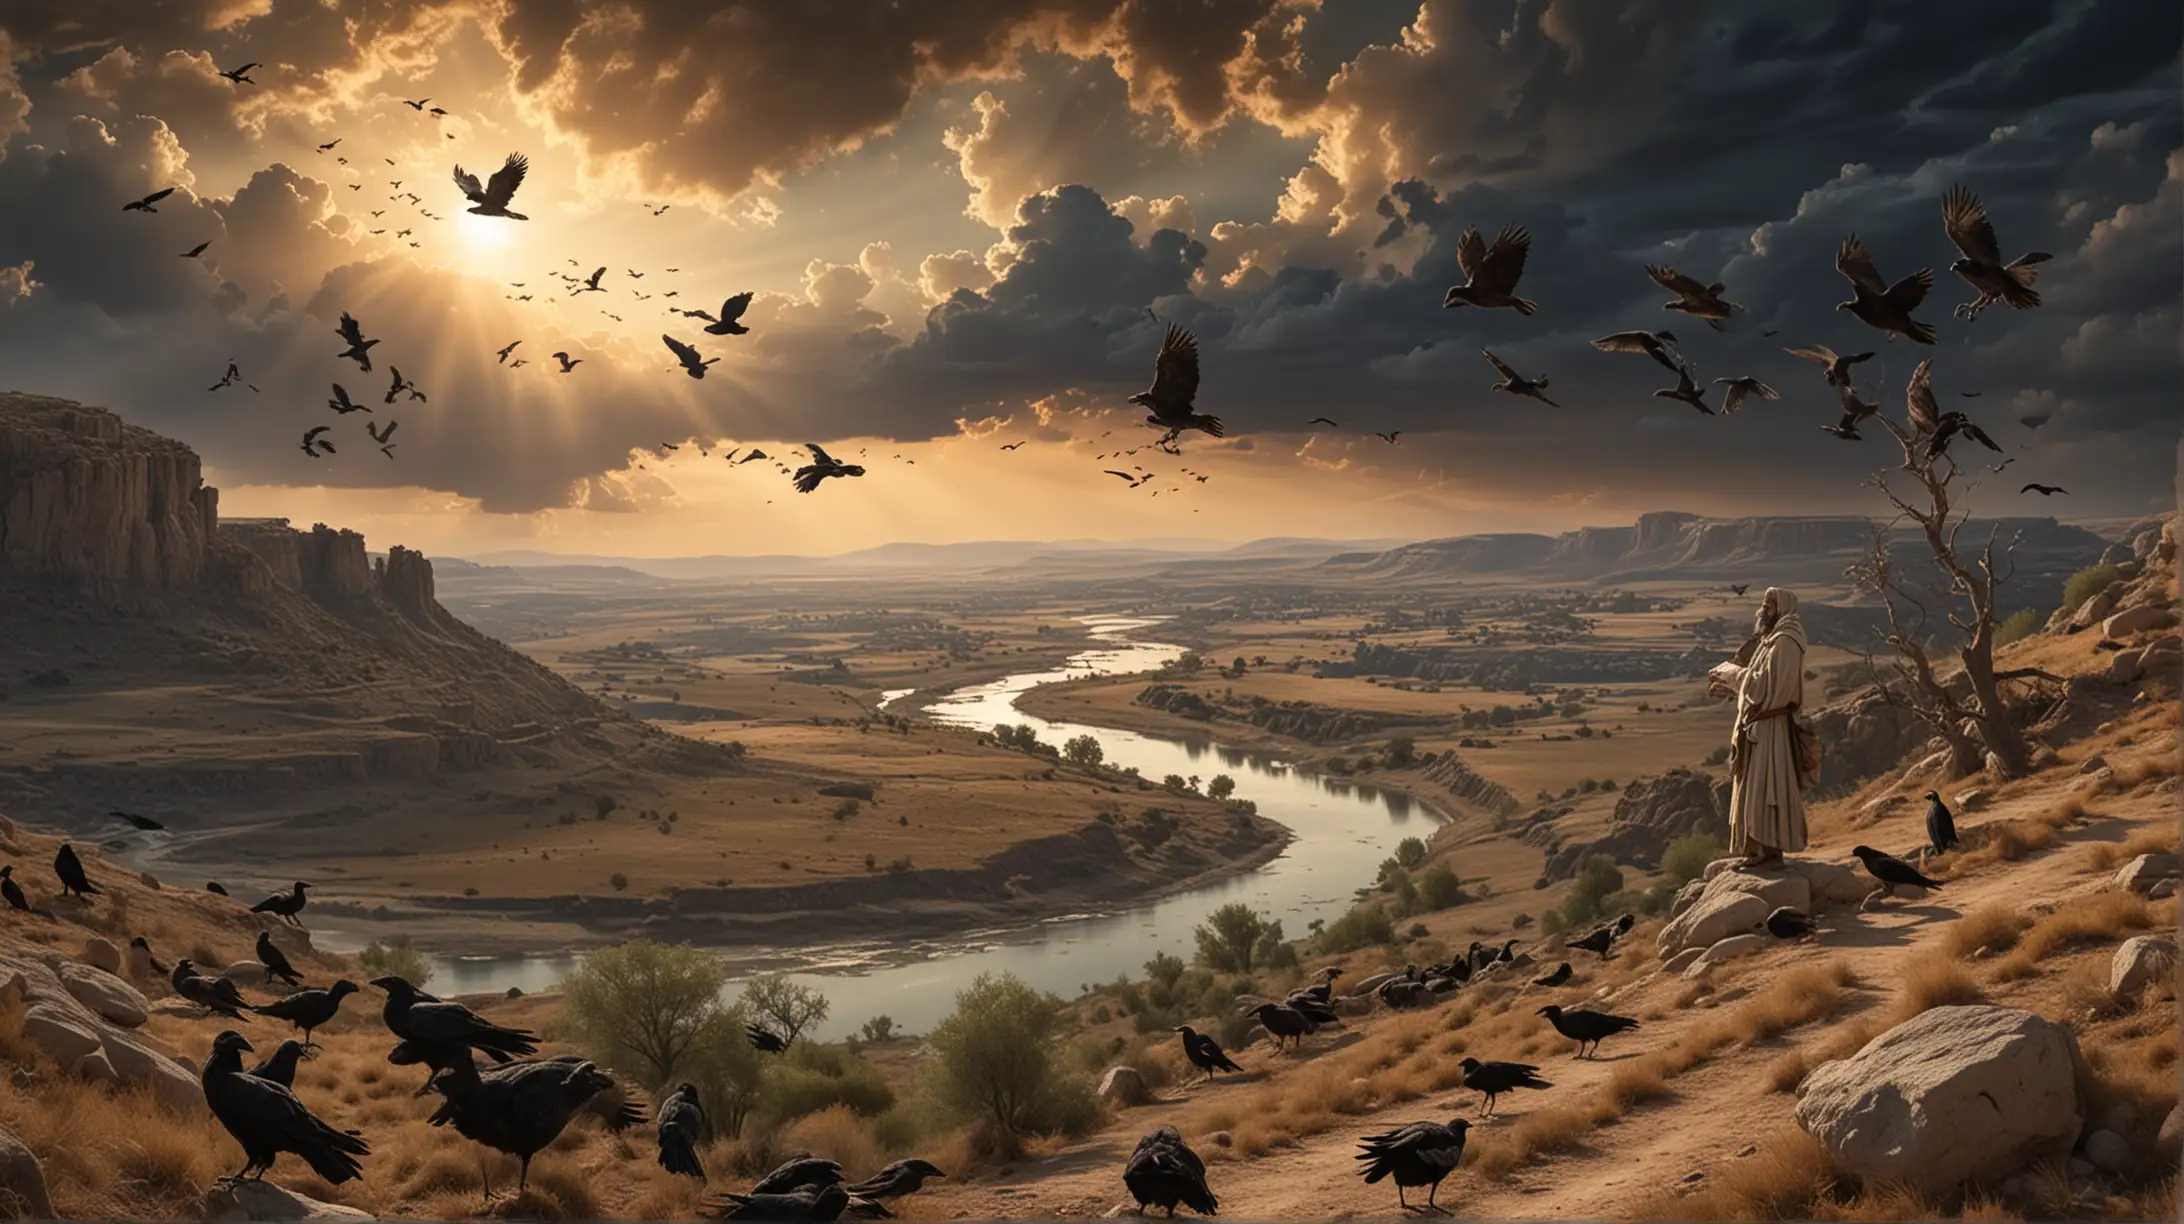 a scene of the Biblical Prophet Elijah on a hill top with a magnificent sky, and some ravens flying around, and in the distance you can see a winding river.